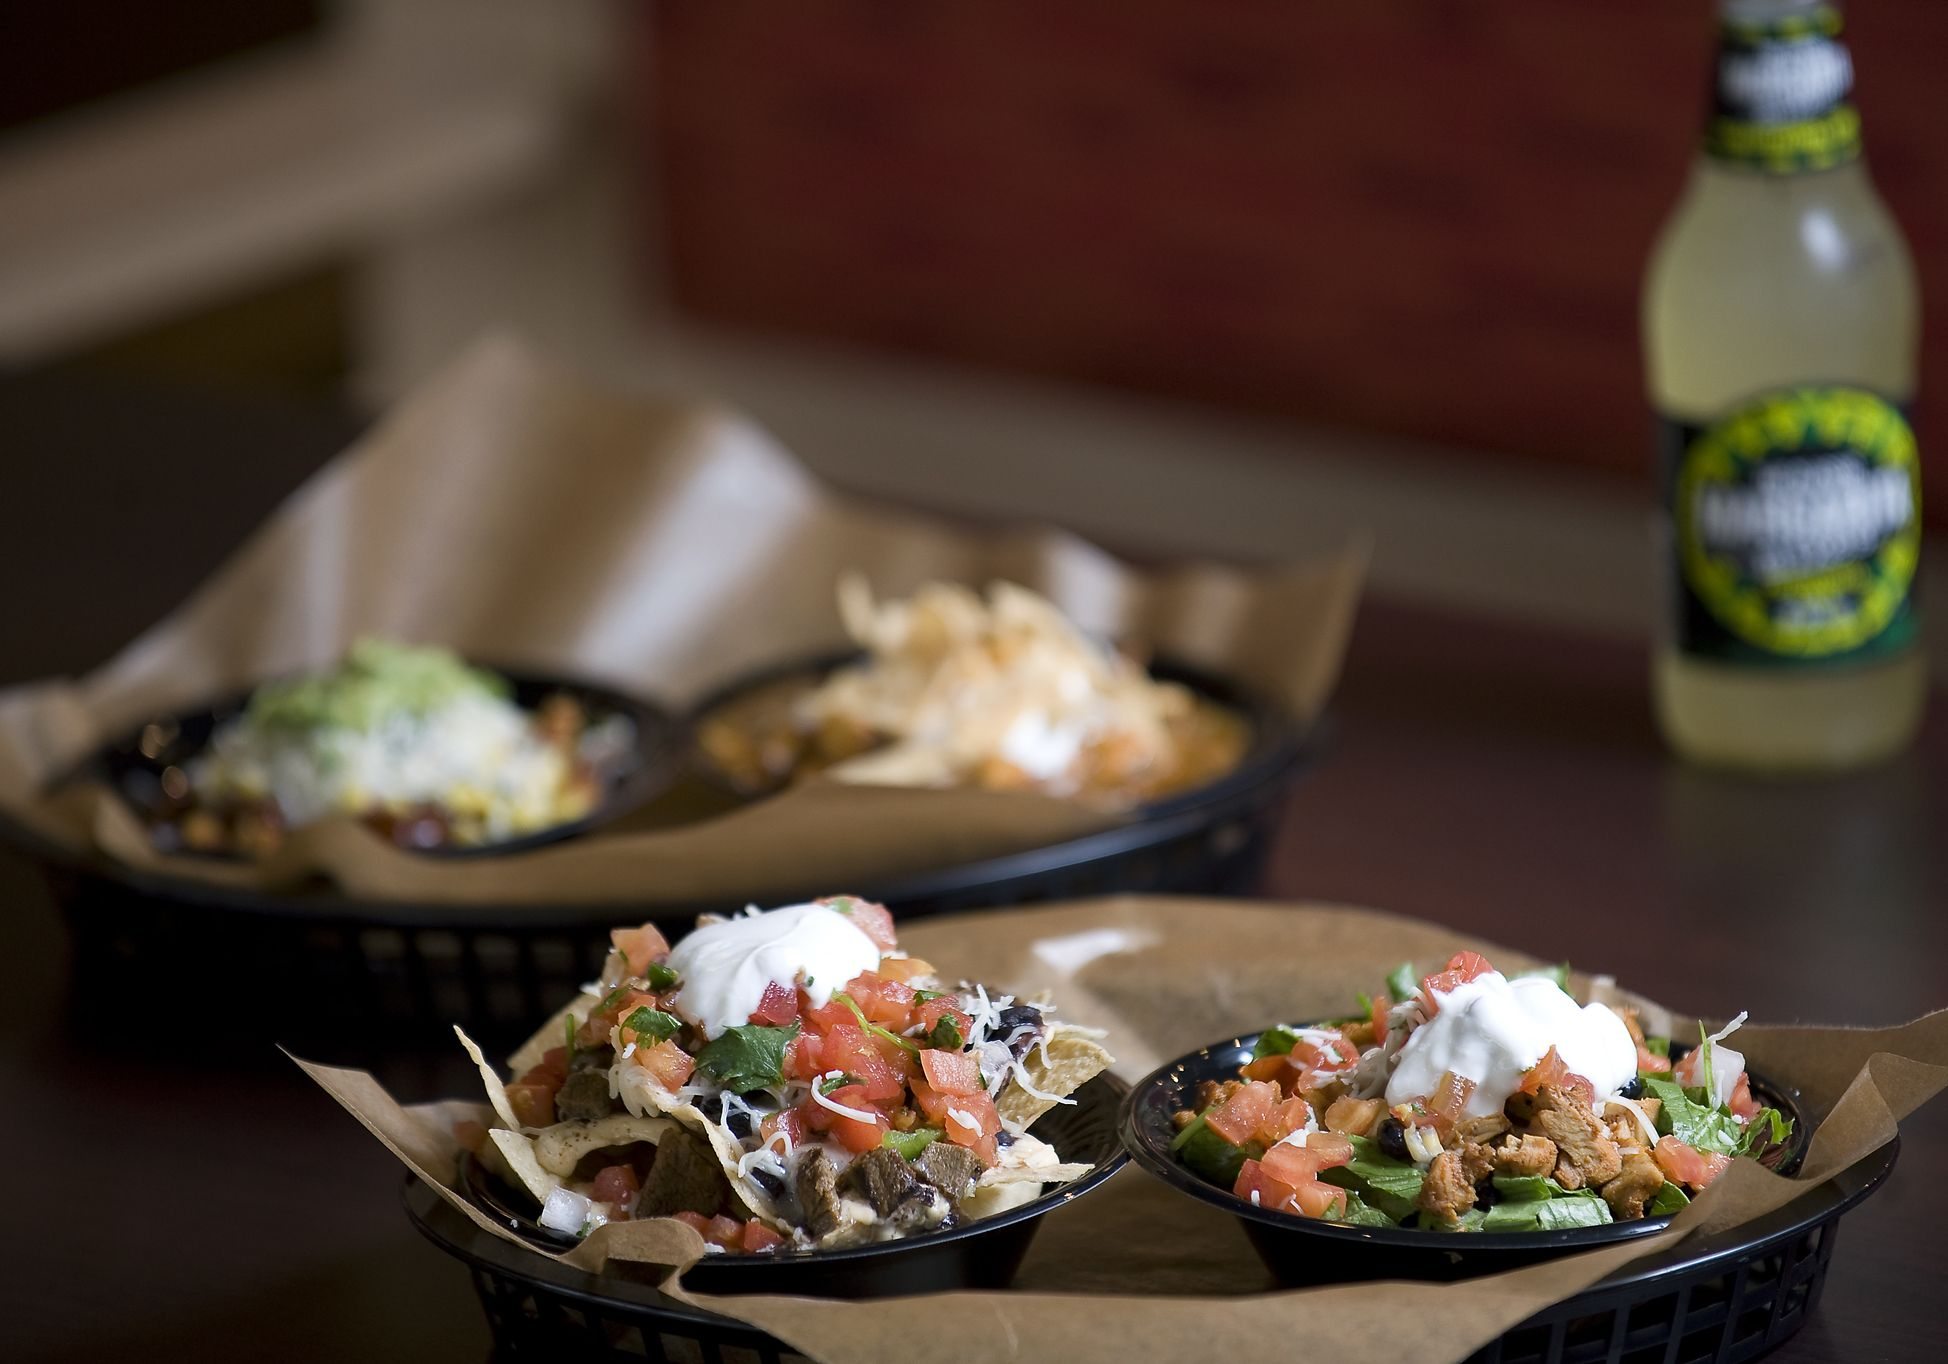 The 3-Cheese Nachos with Pulled Pork and a Taco Salad with Grilled Steak are among the many offerings at Qdoba's first Washington location, in Camas.